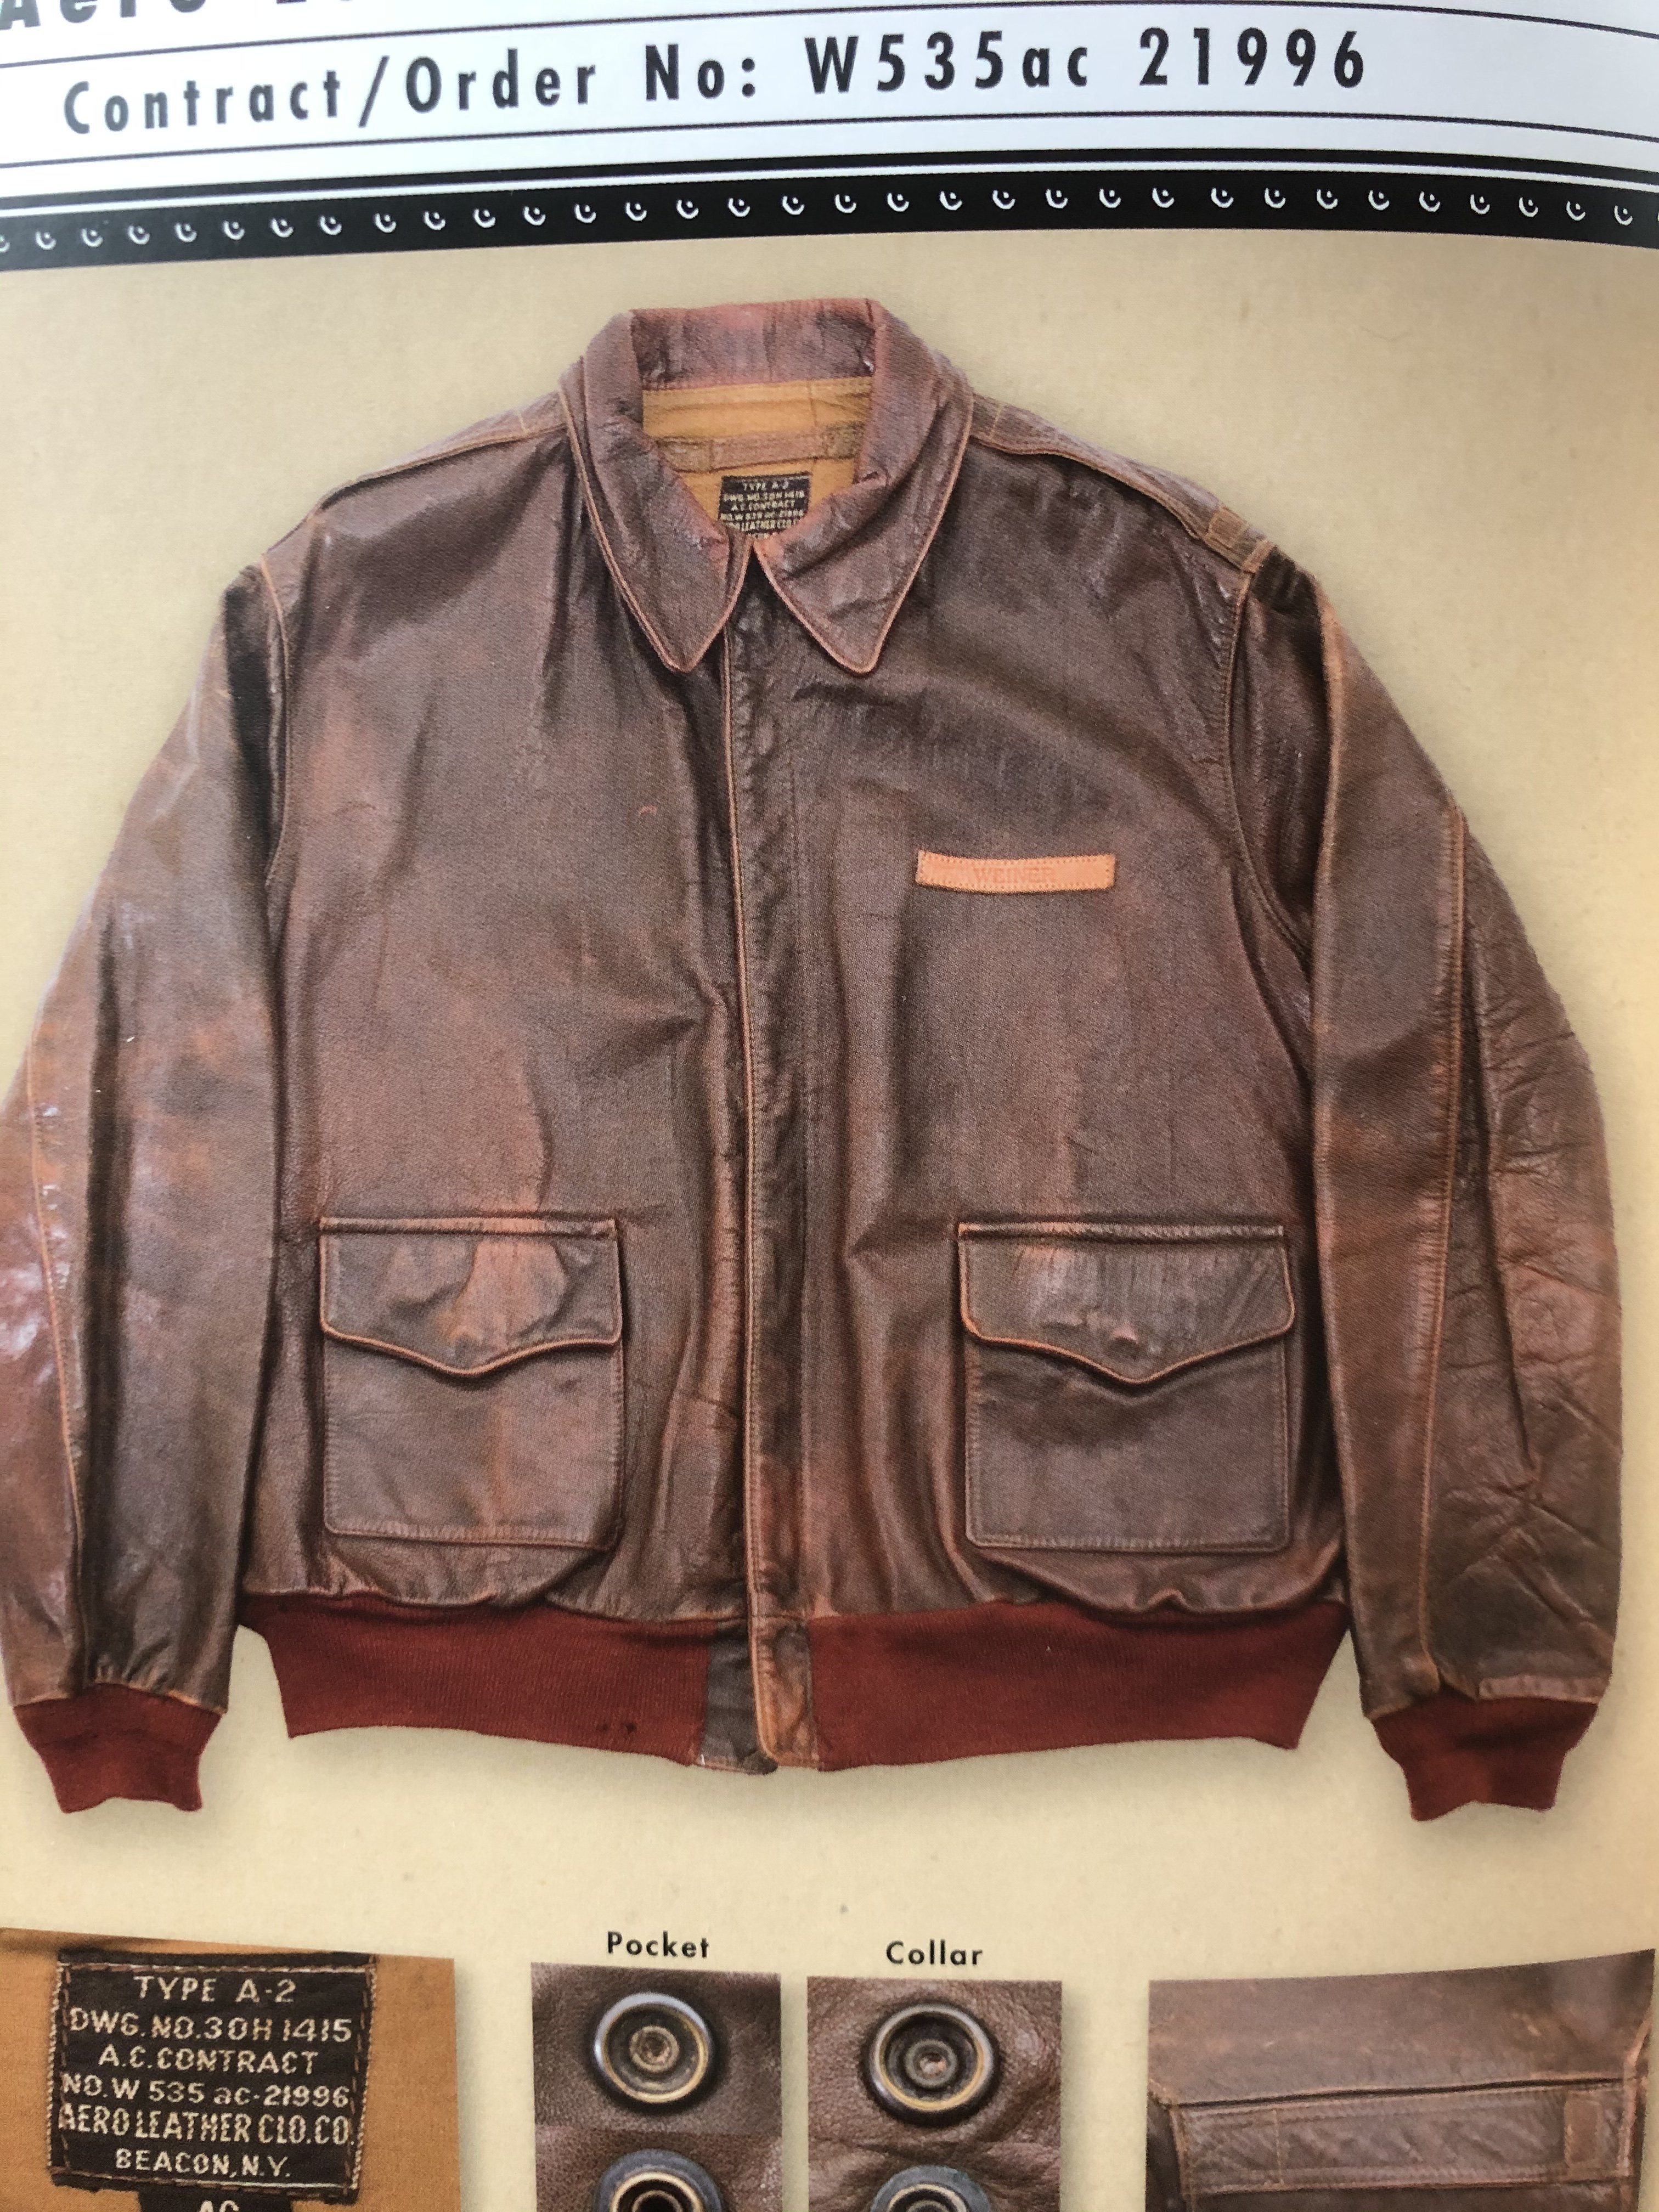 Civi AN-J-3 By FiveStar | Page 2 | Vintage Leather Jackets Forum